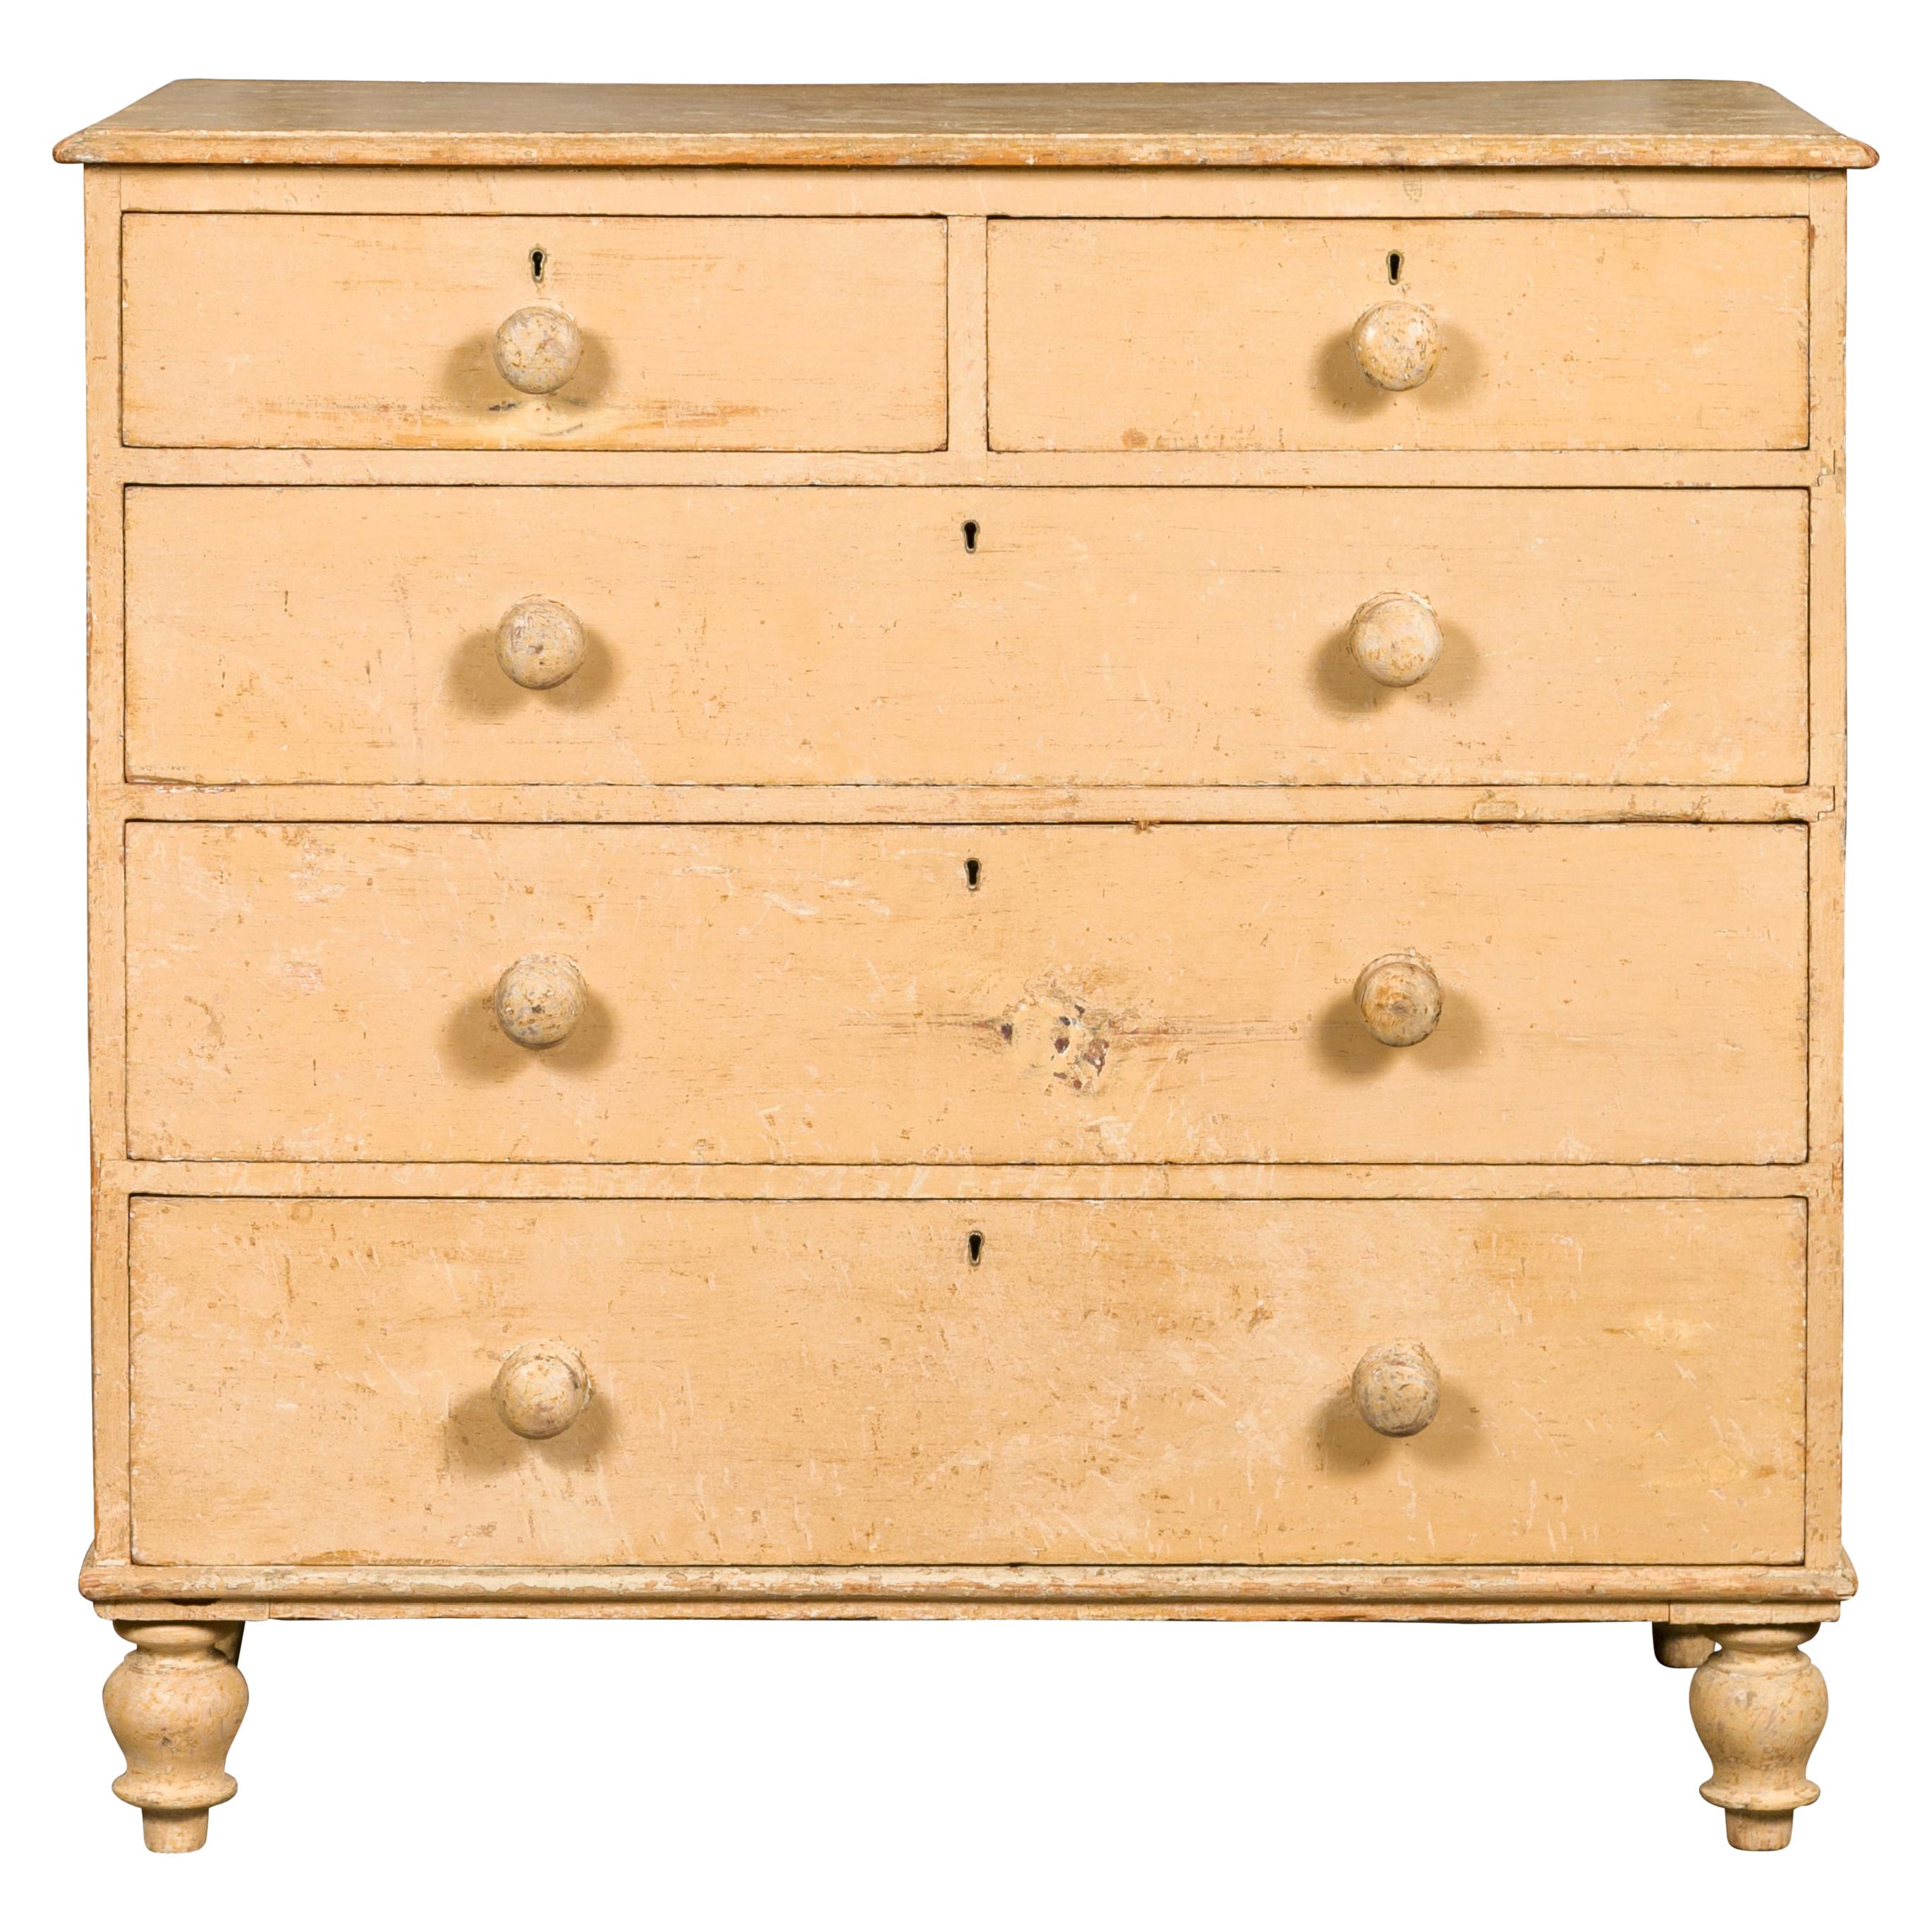 English 1860s Painted Wood Five-Drawer Chest with Turnip Feet and Wooden Pulls For Sale